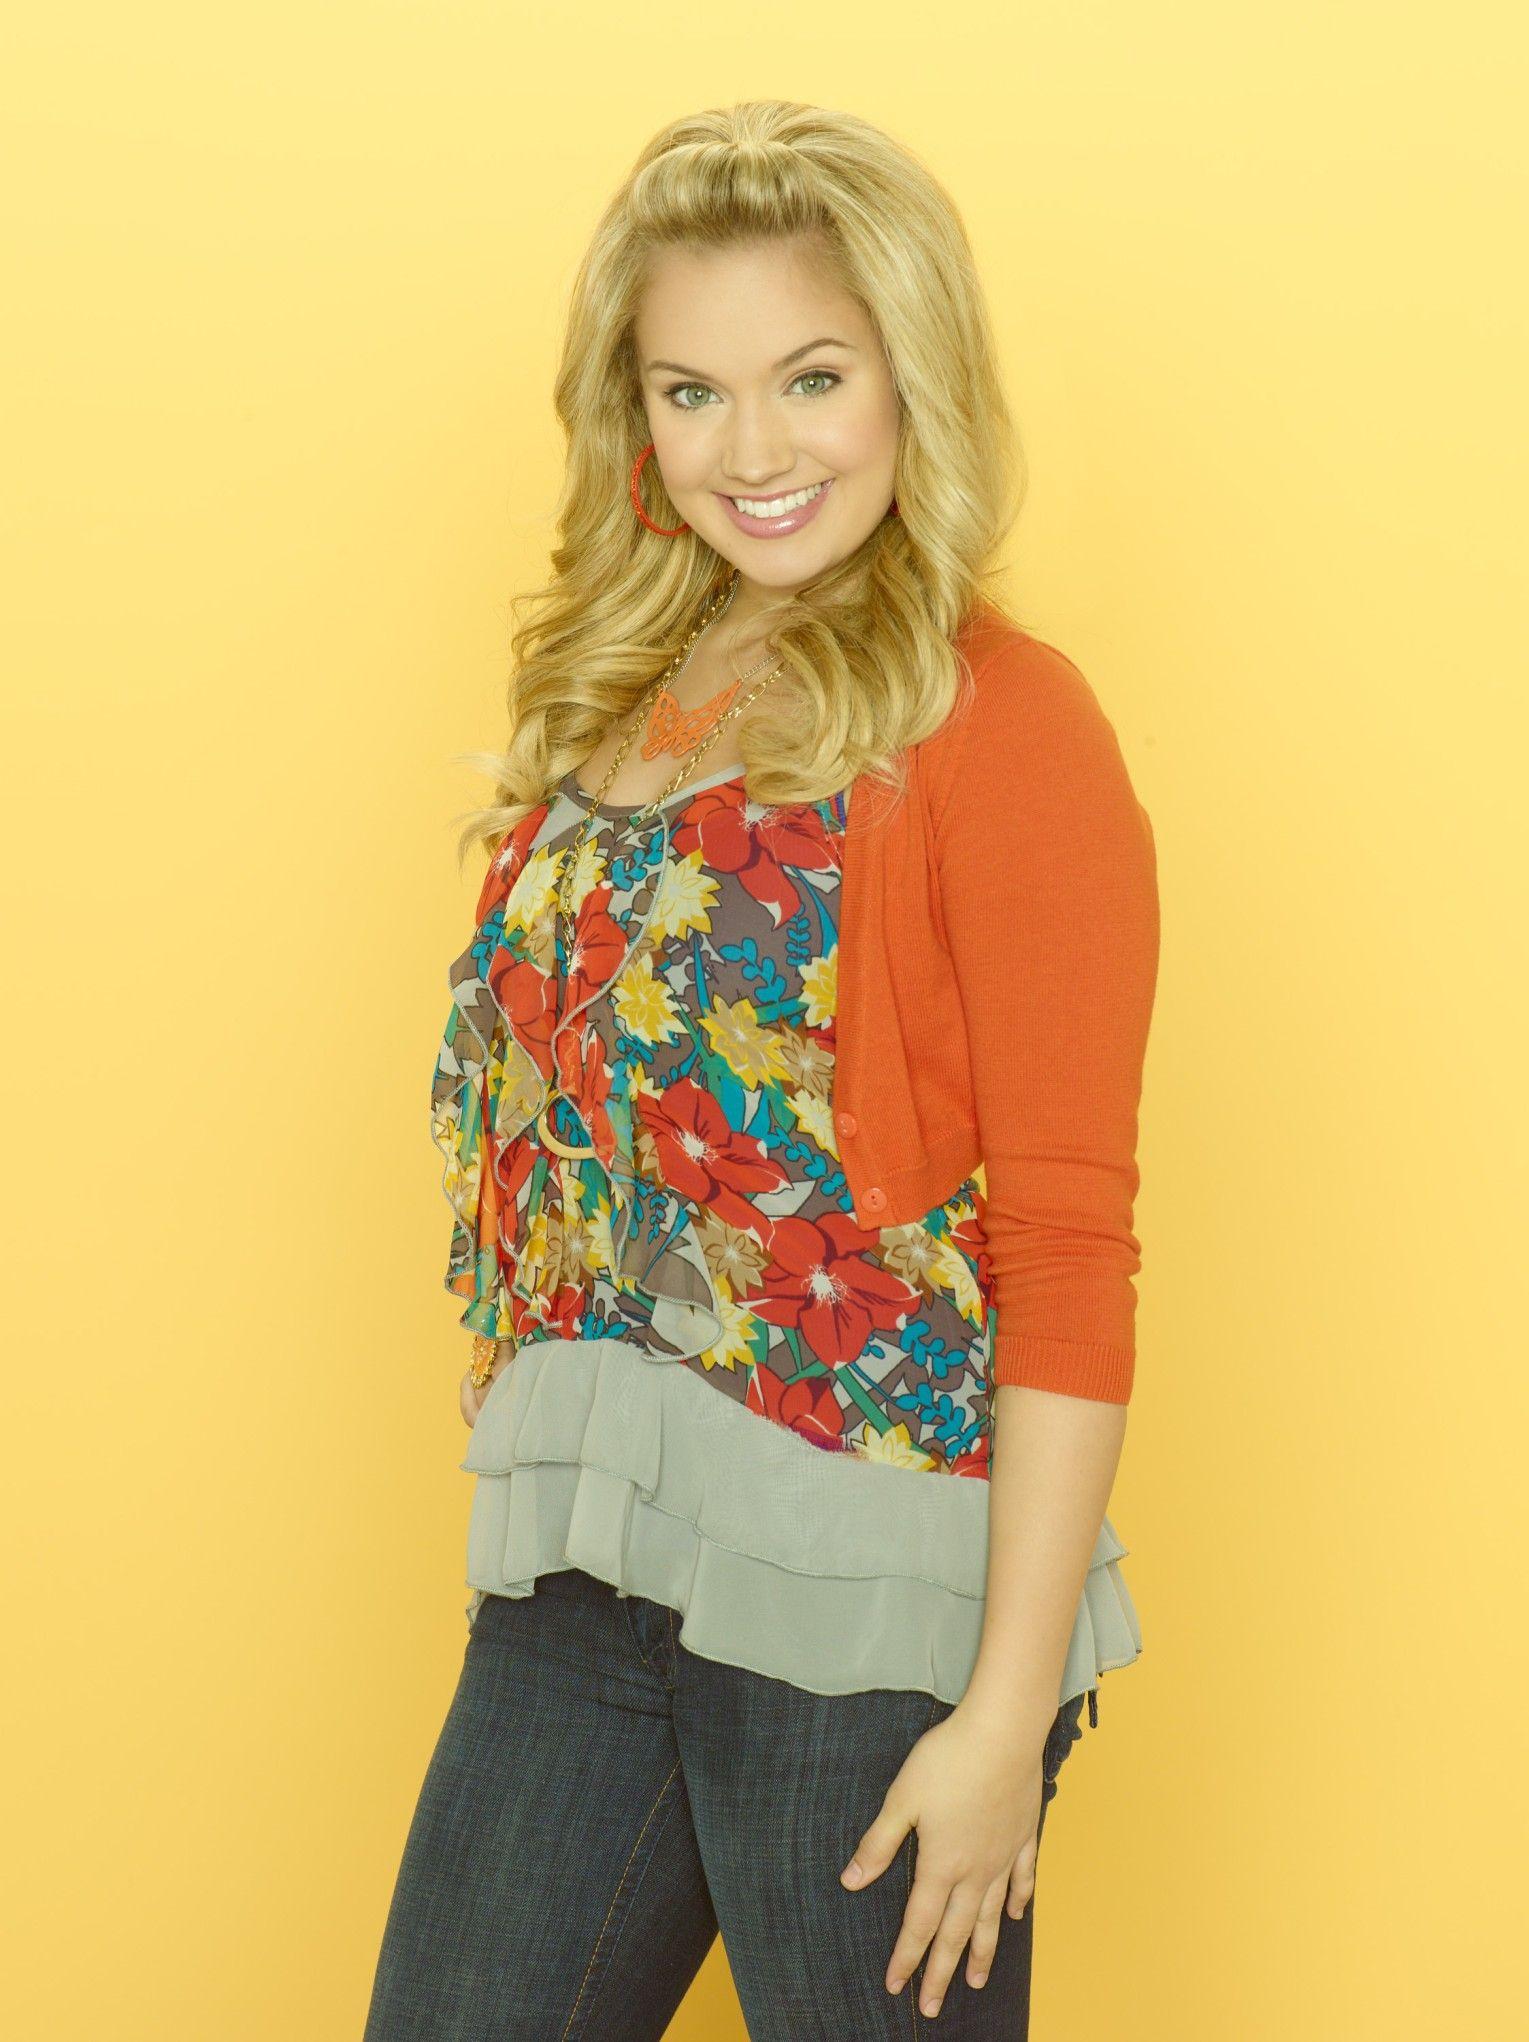 Tiffany Thornton. Sonny With a Chance